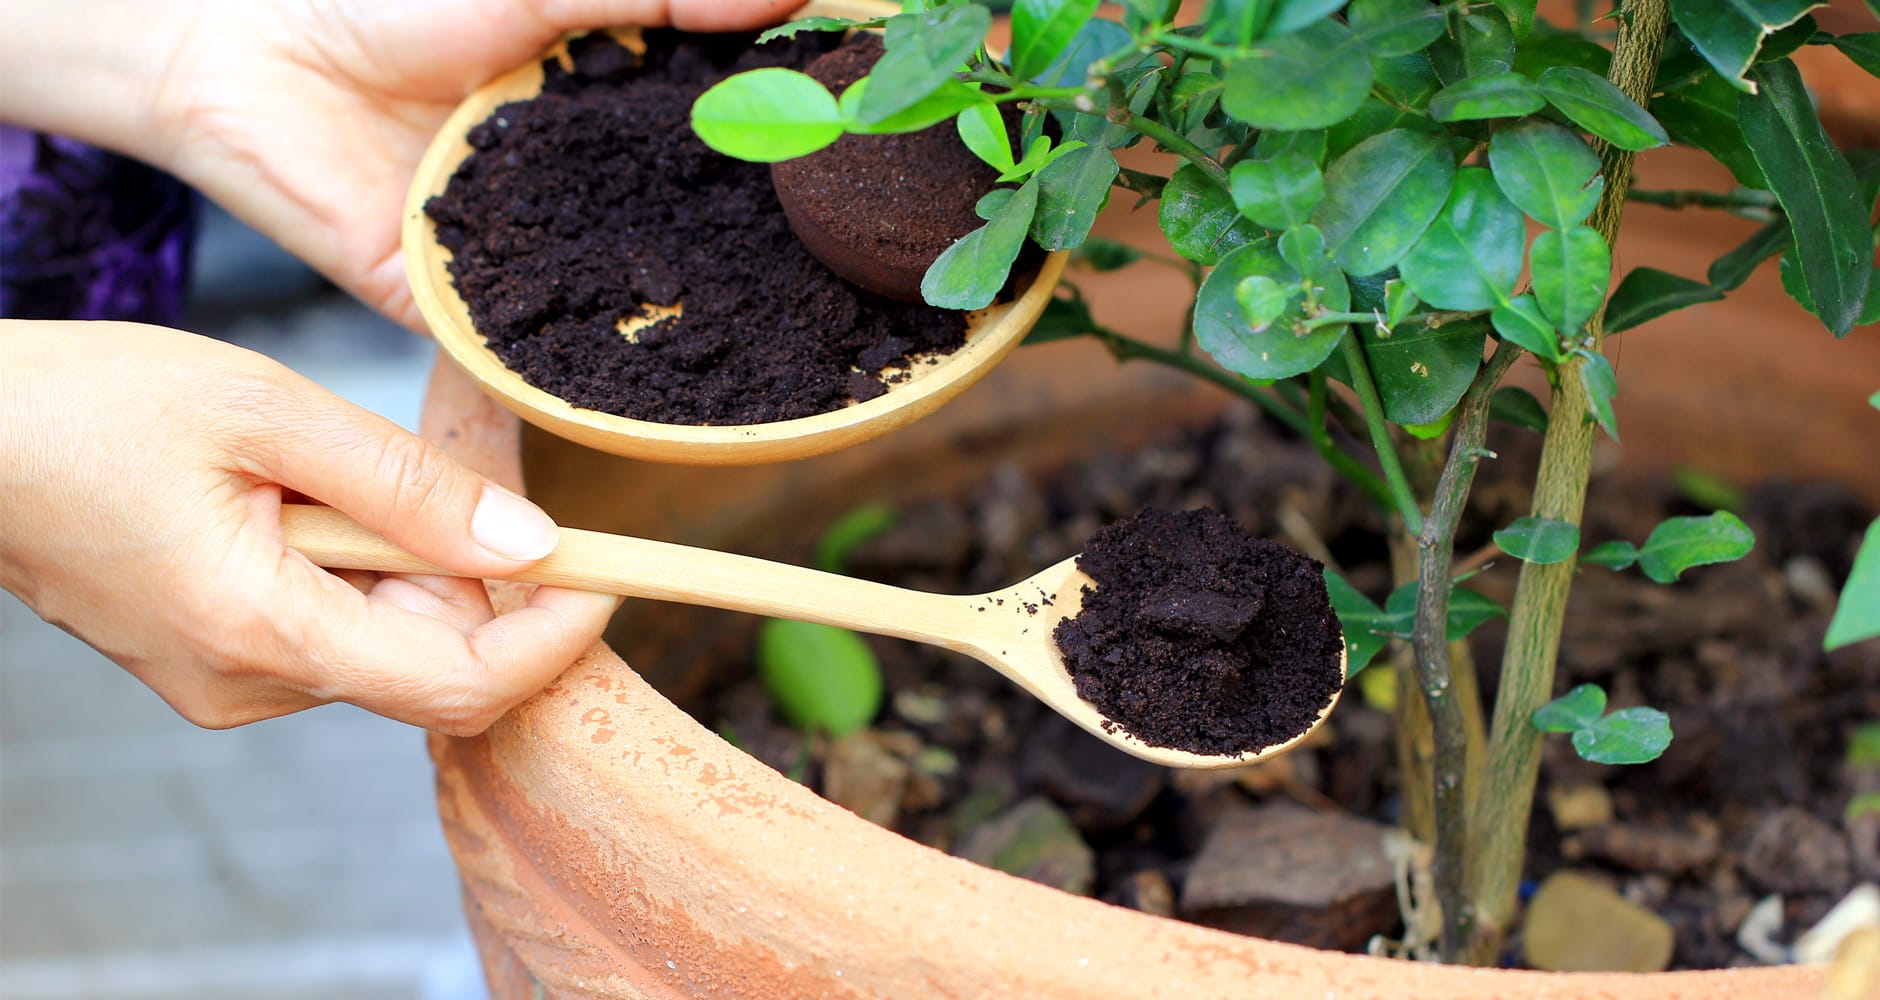 How to make plant fertilizer – 7 natural methods to try